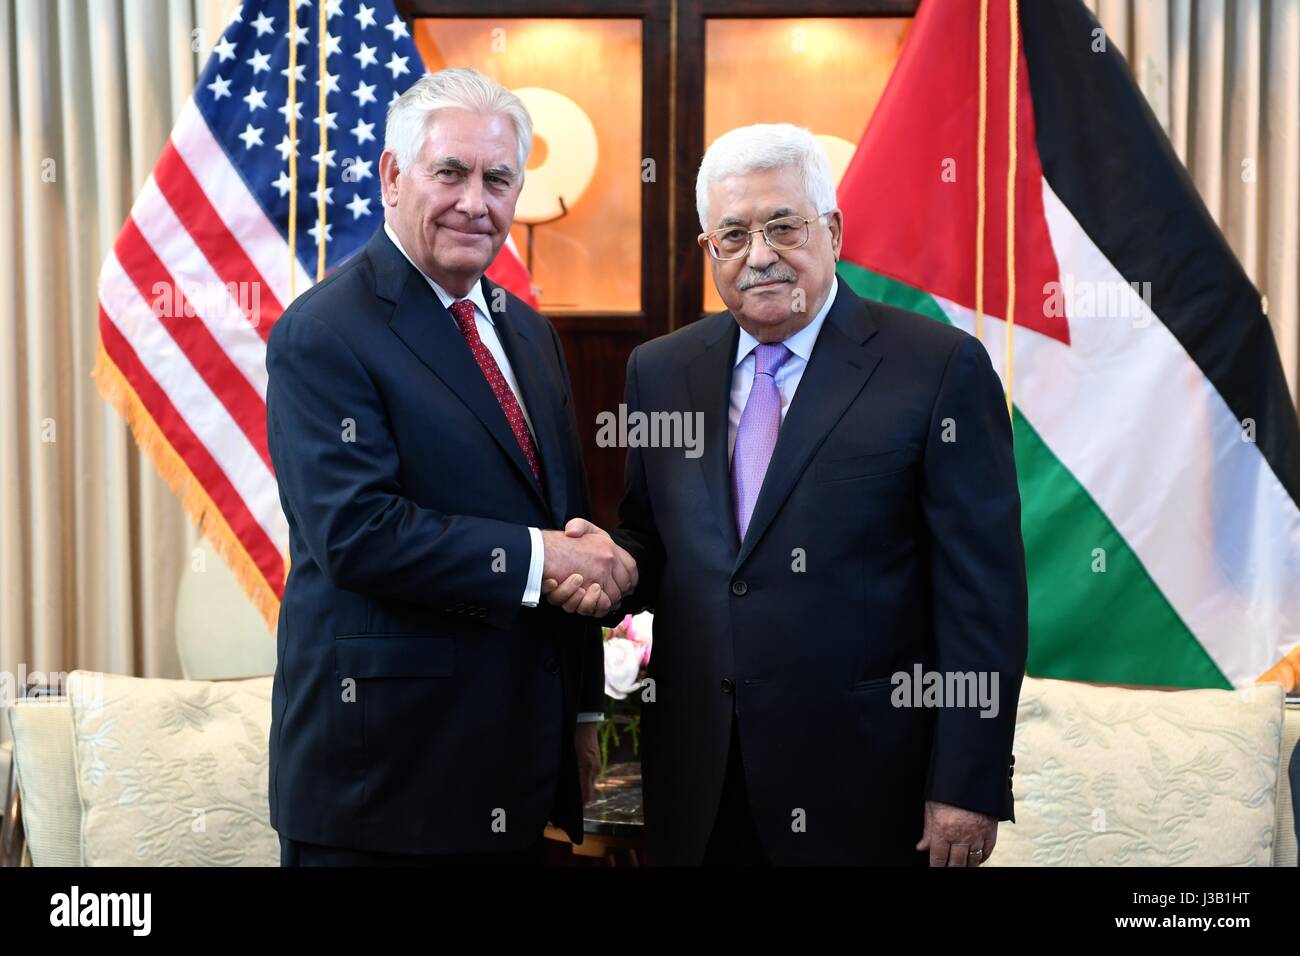 U.S. Secretary of State Rex Tillerson greets Palestinian Authority President Mahmoud Abbas before bilateral talks May 3, 2017 in Washington, D.C. Stock Photo